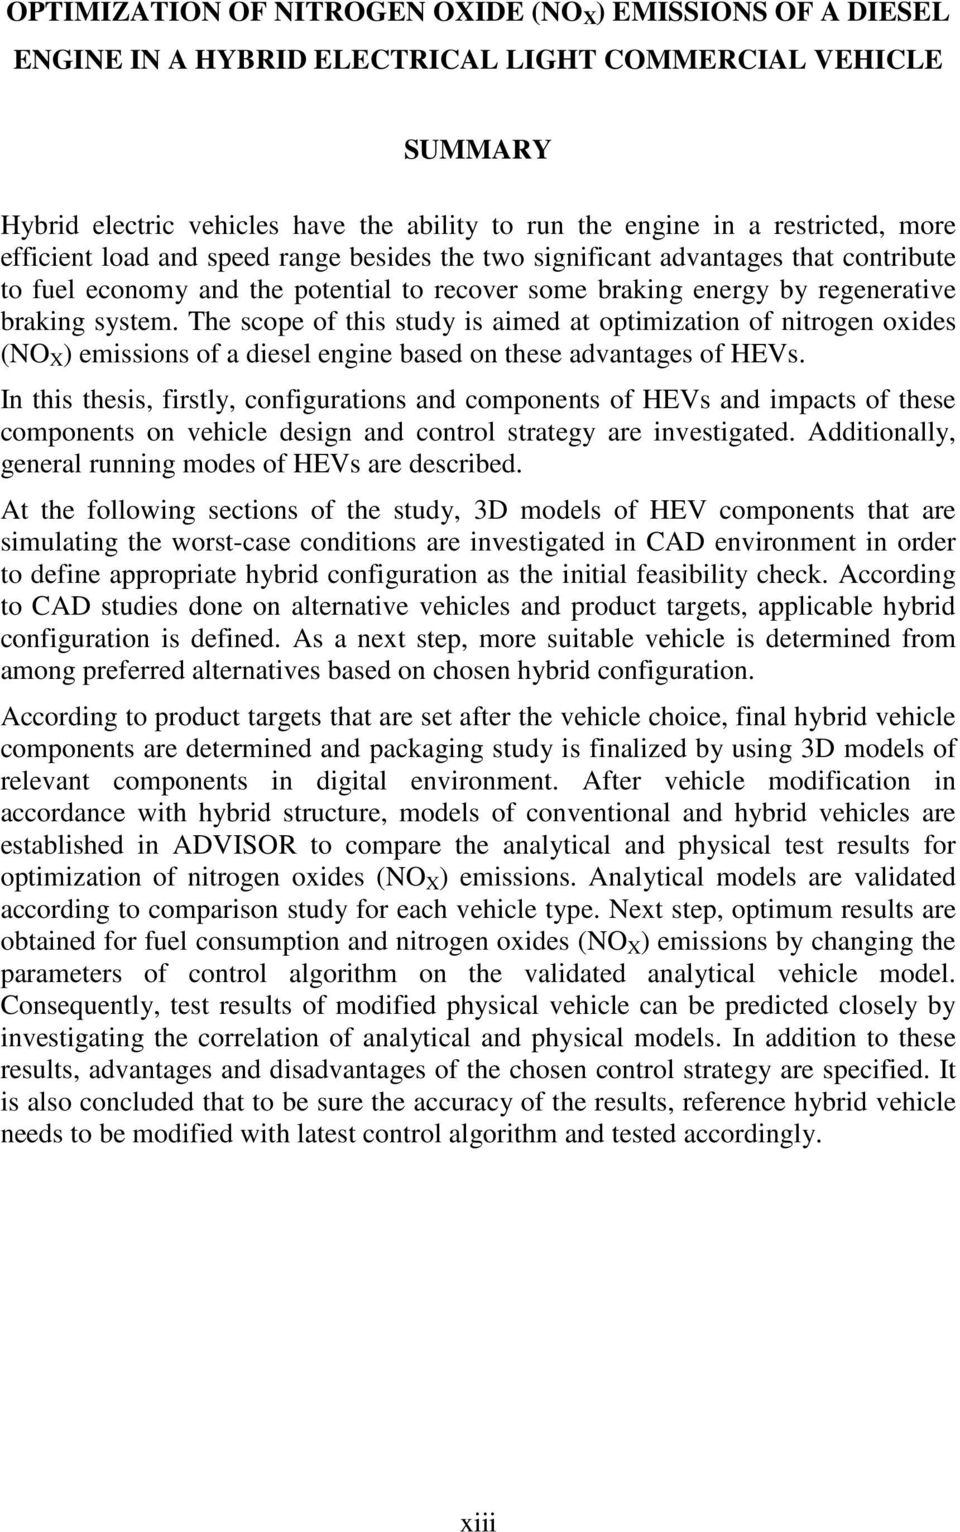 The scope of this study is aimed at optimization of nitrogen oxides (NO X ) emissions of a diesel engine based on these advantages of HEVs.